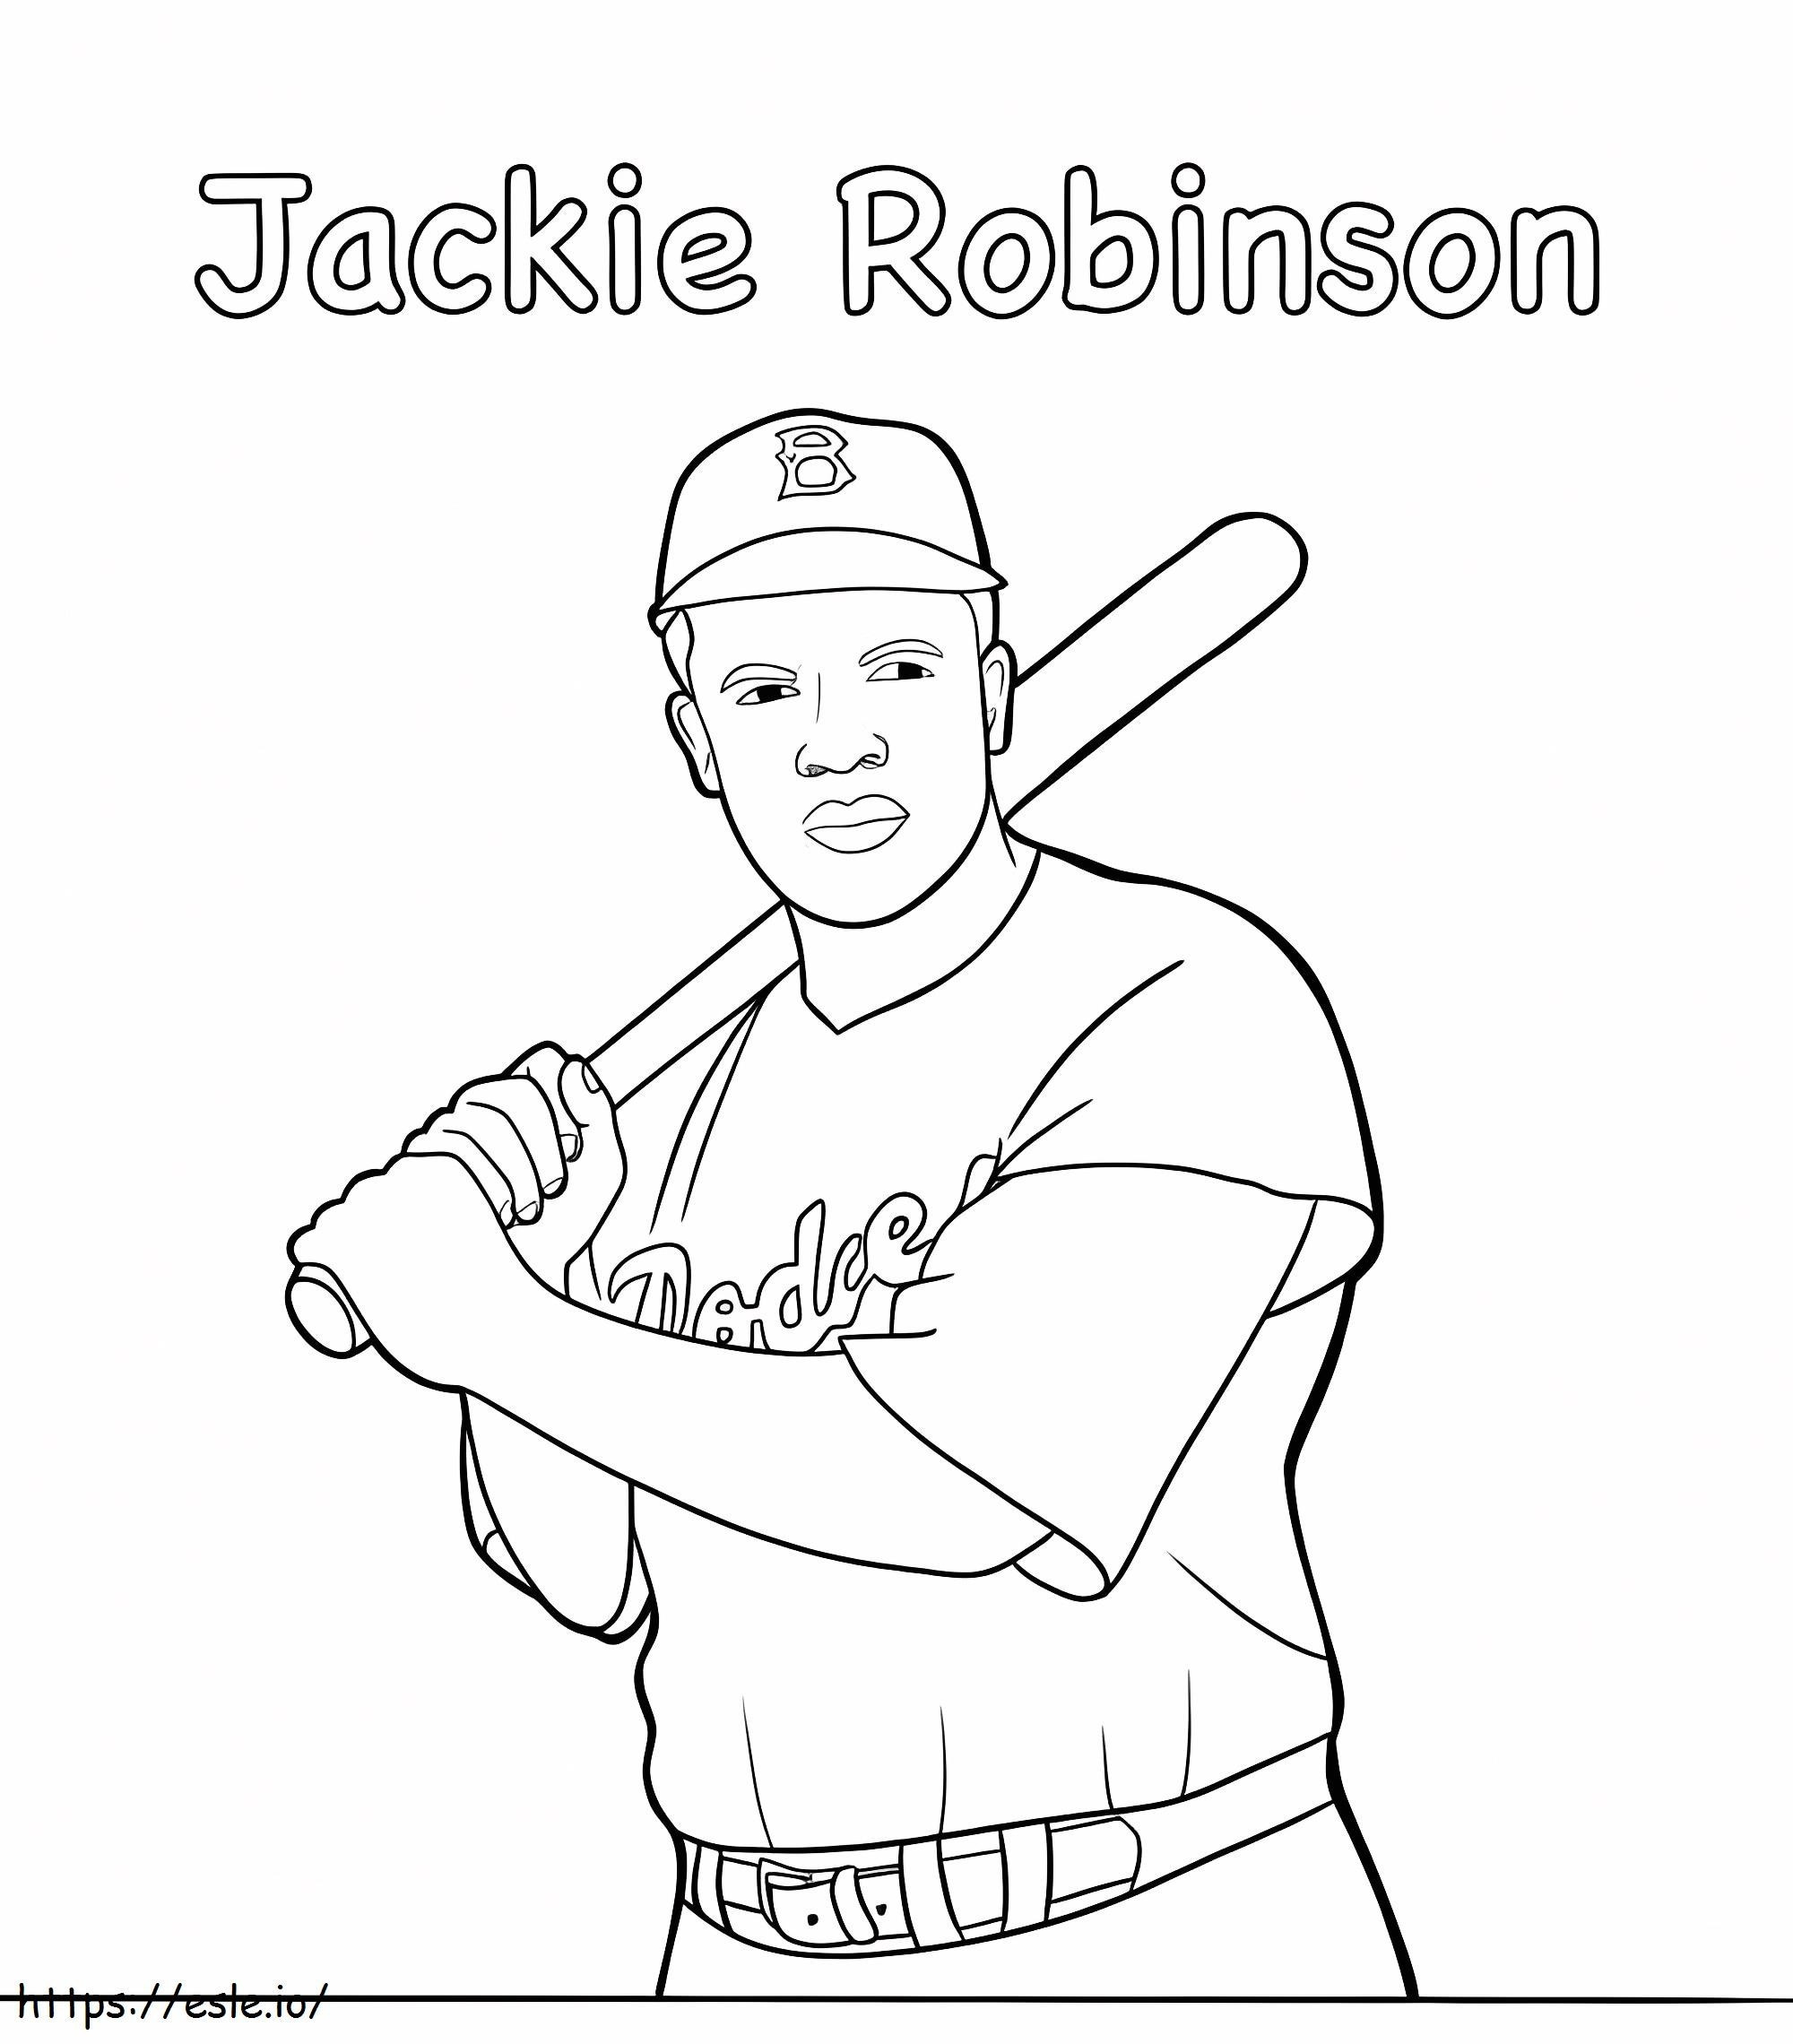 Jackie Robinson 9 coloring page